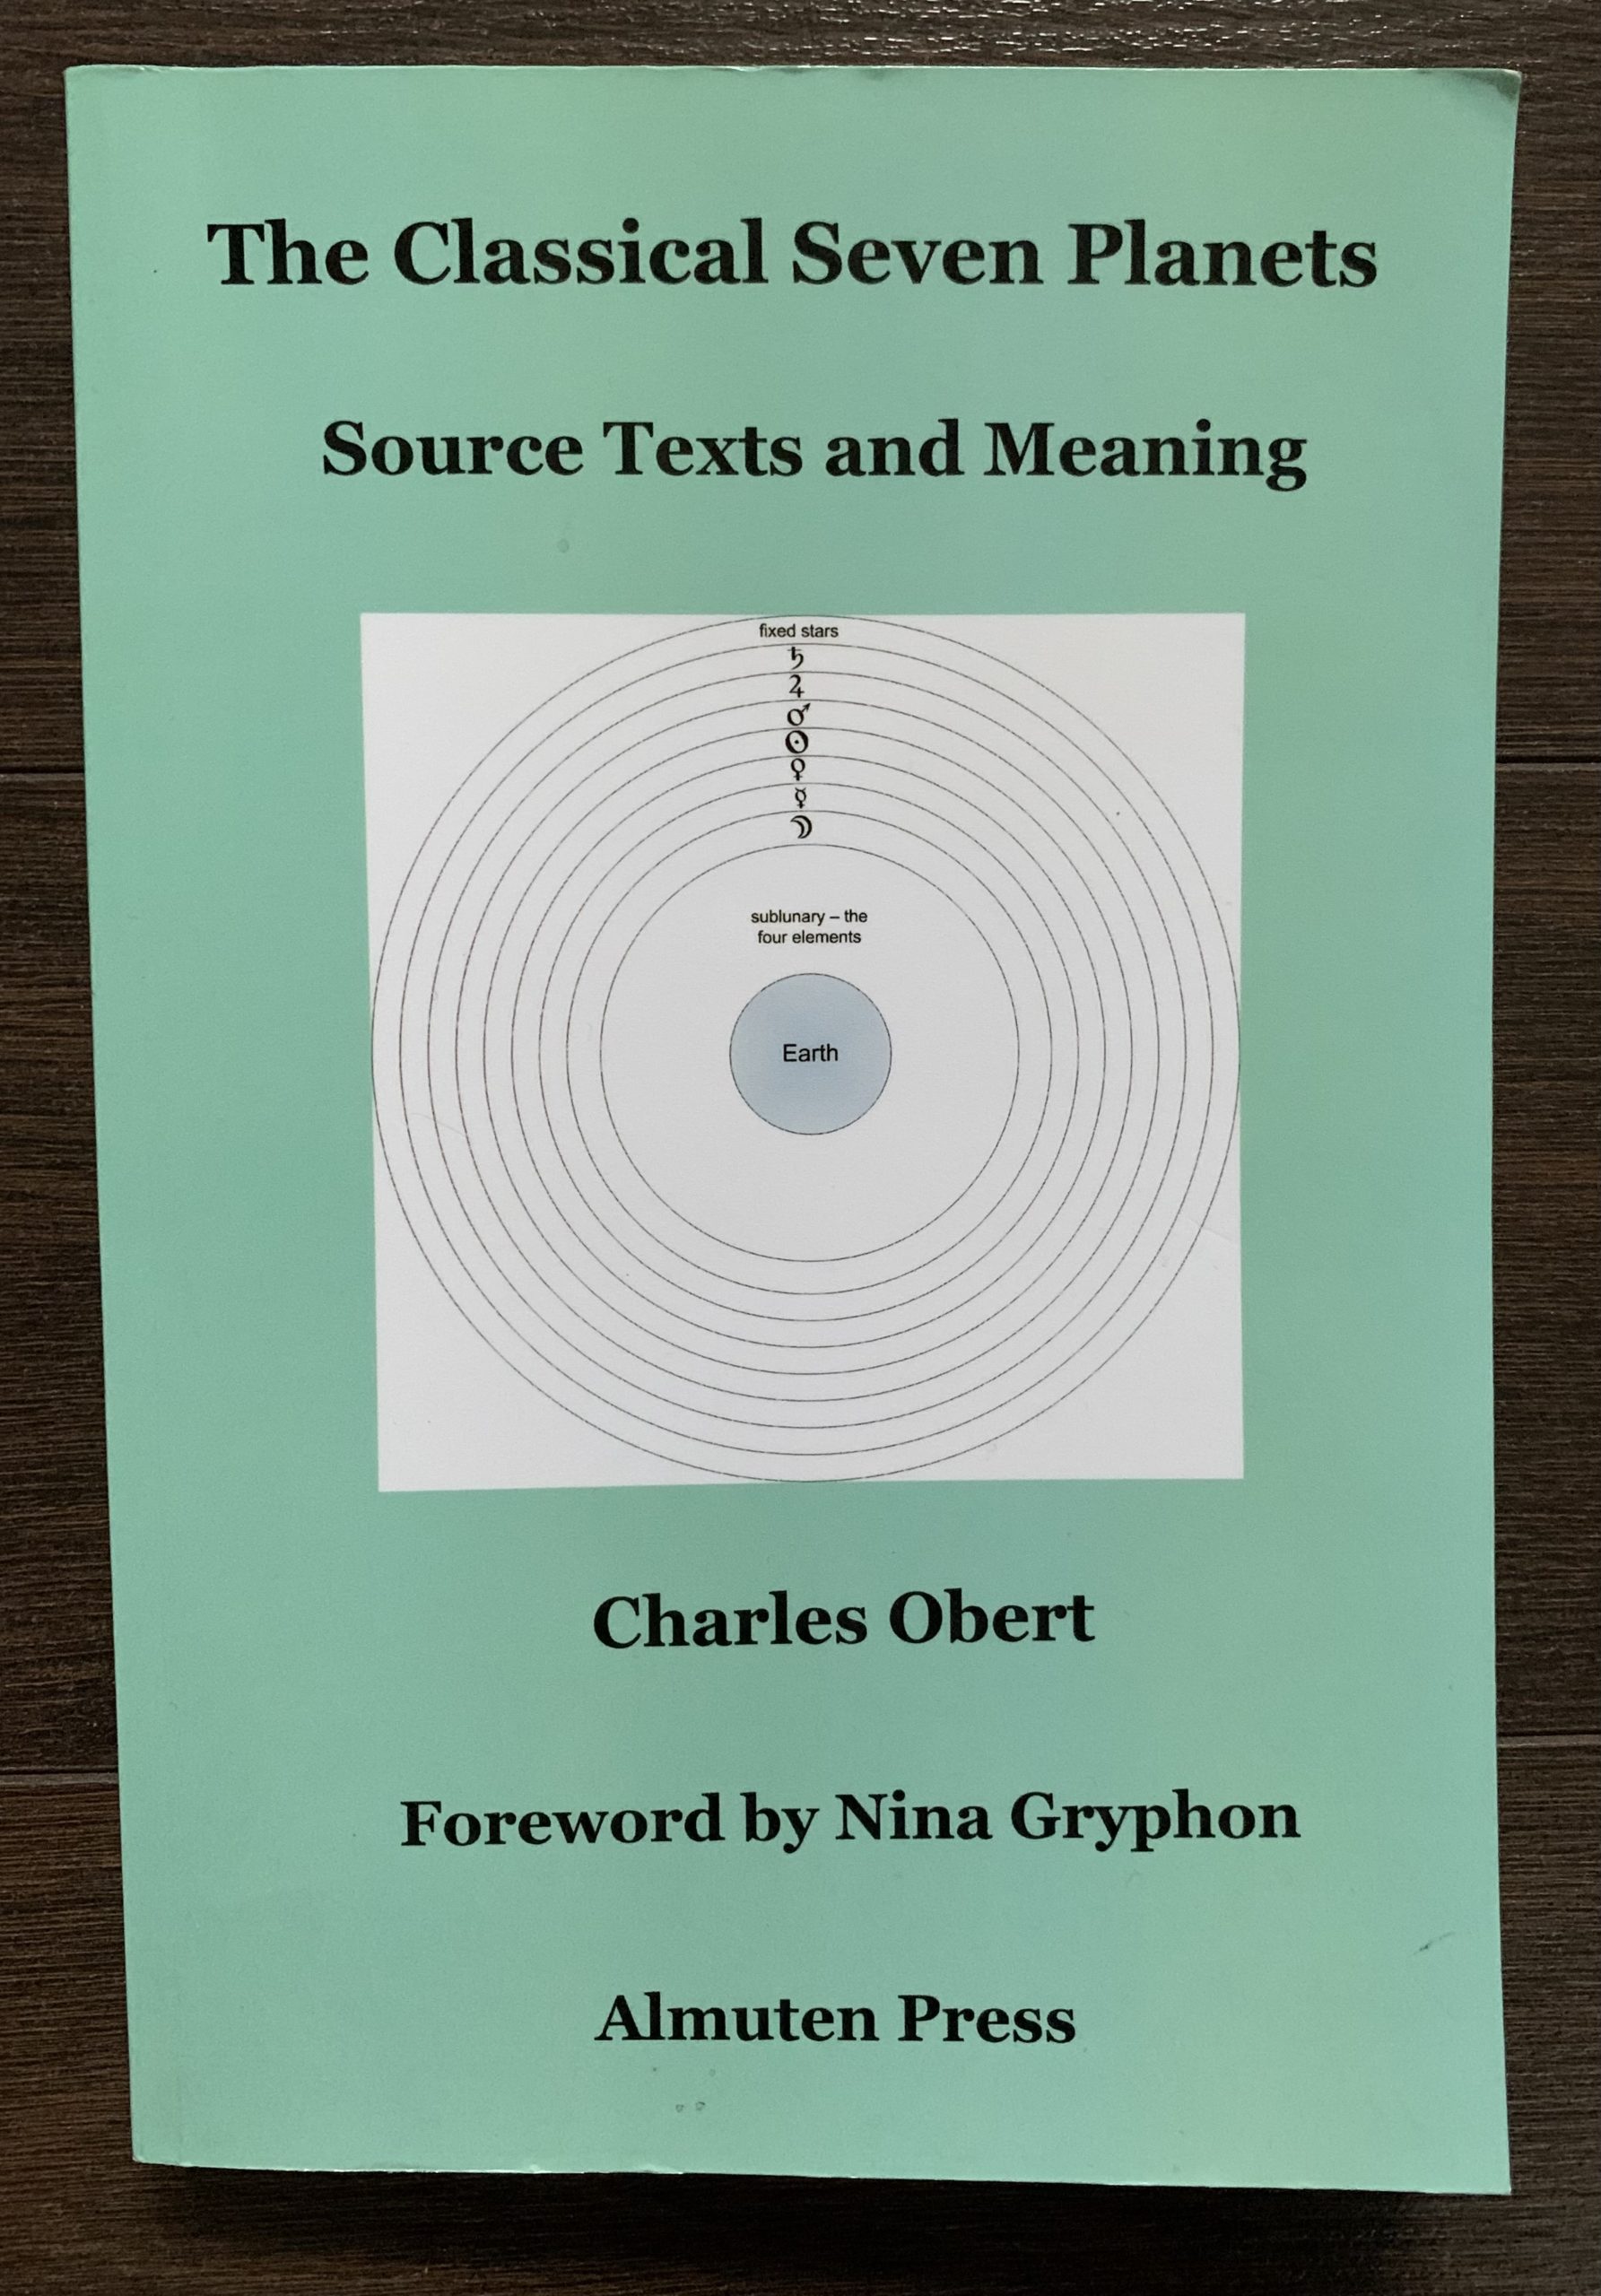 The cover of a book: The Classical Seven Planets: Source Texts and Meaning by Charles Obert